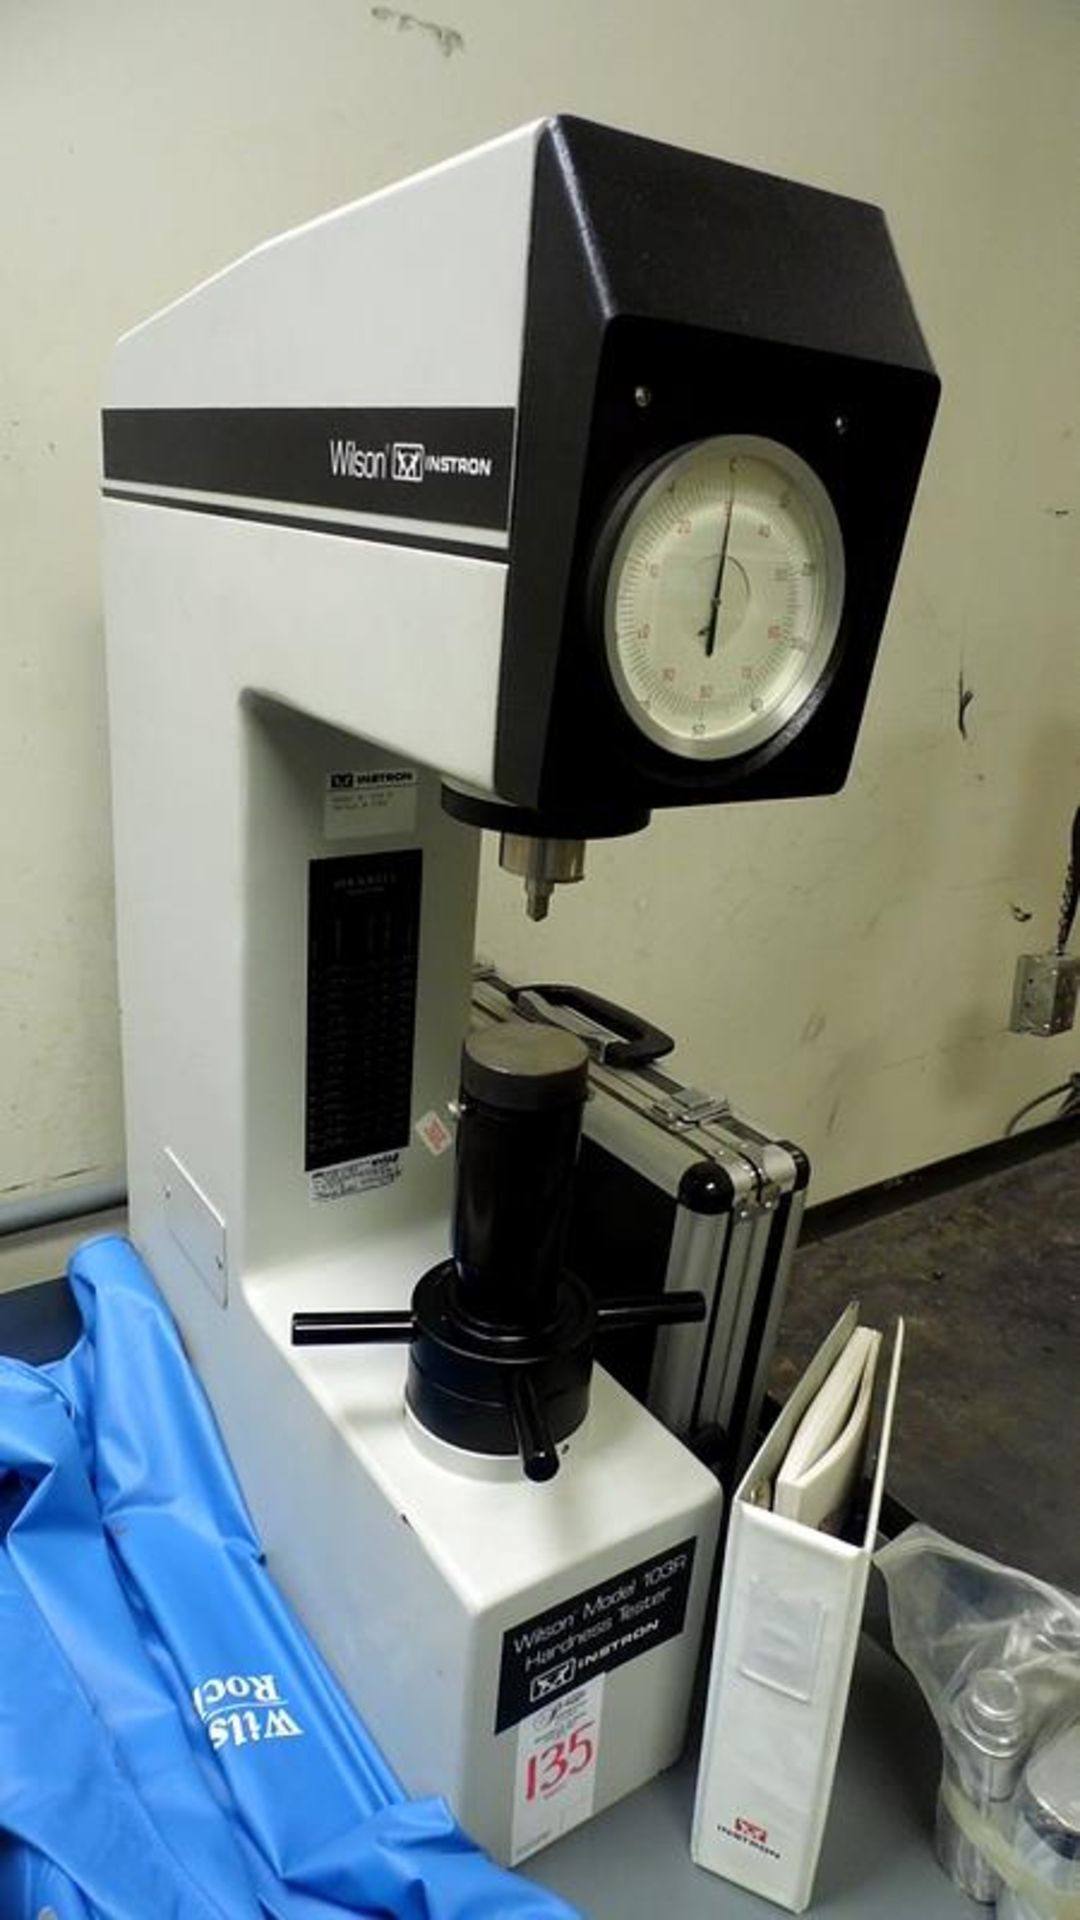 ROCKWELL INSTRON HARDNESS TESTER # 103R